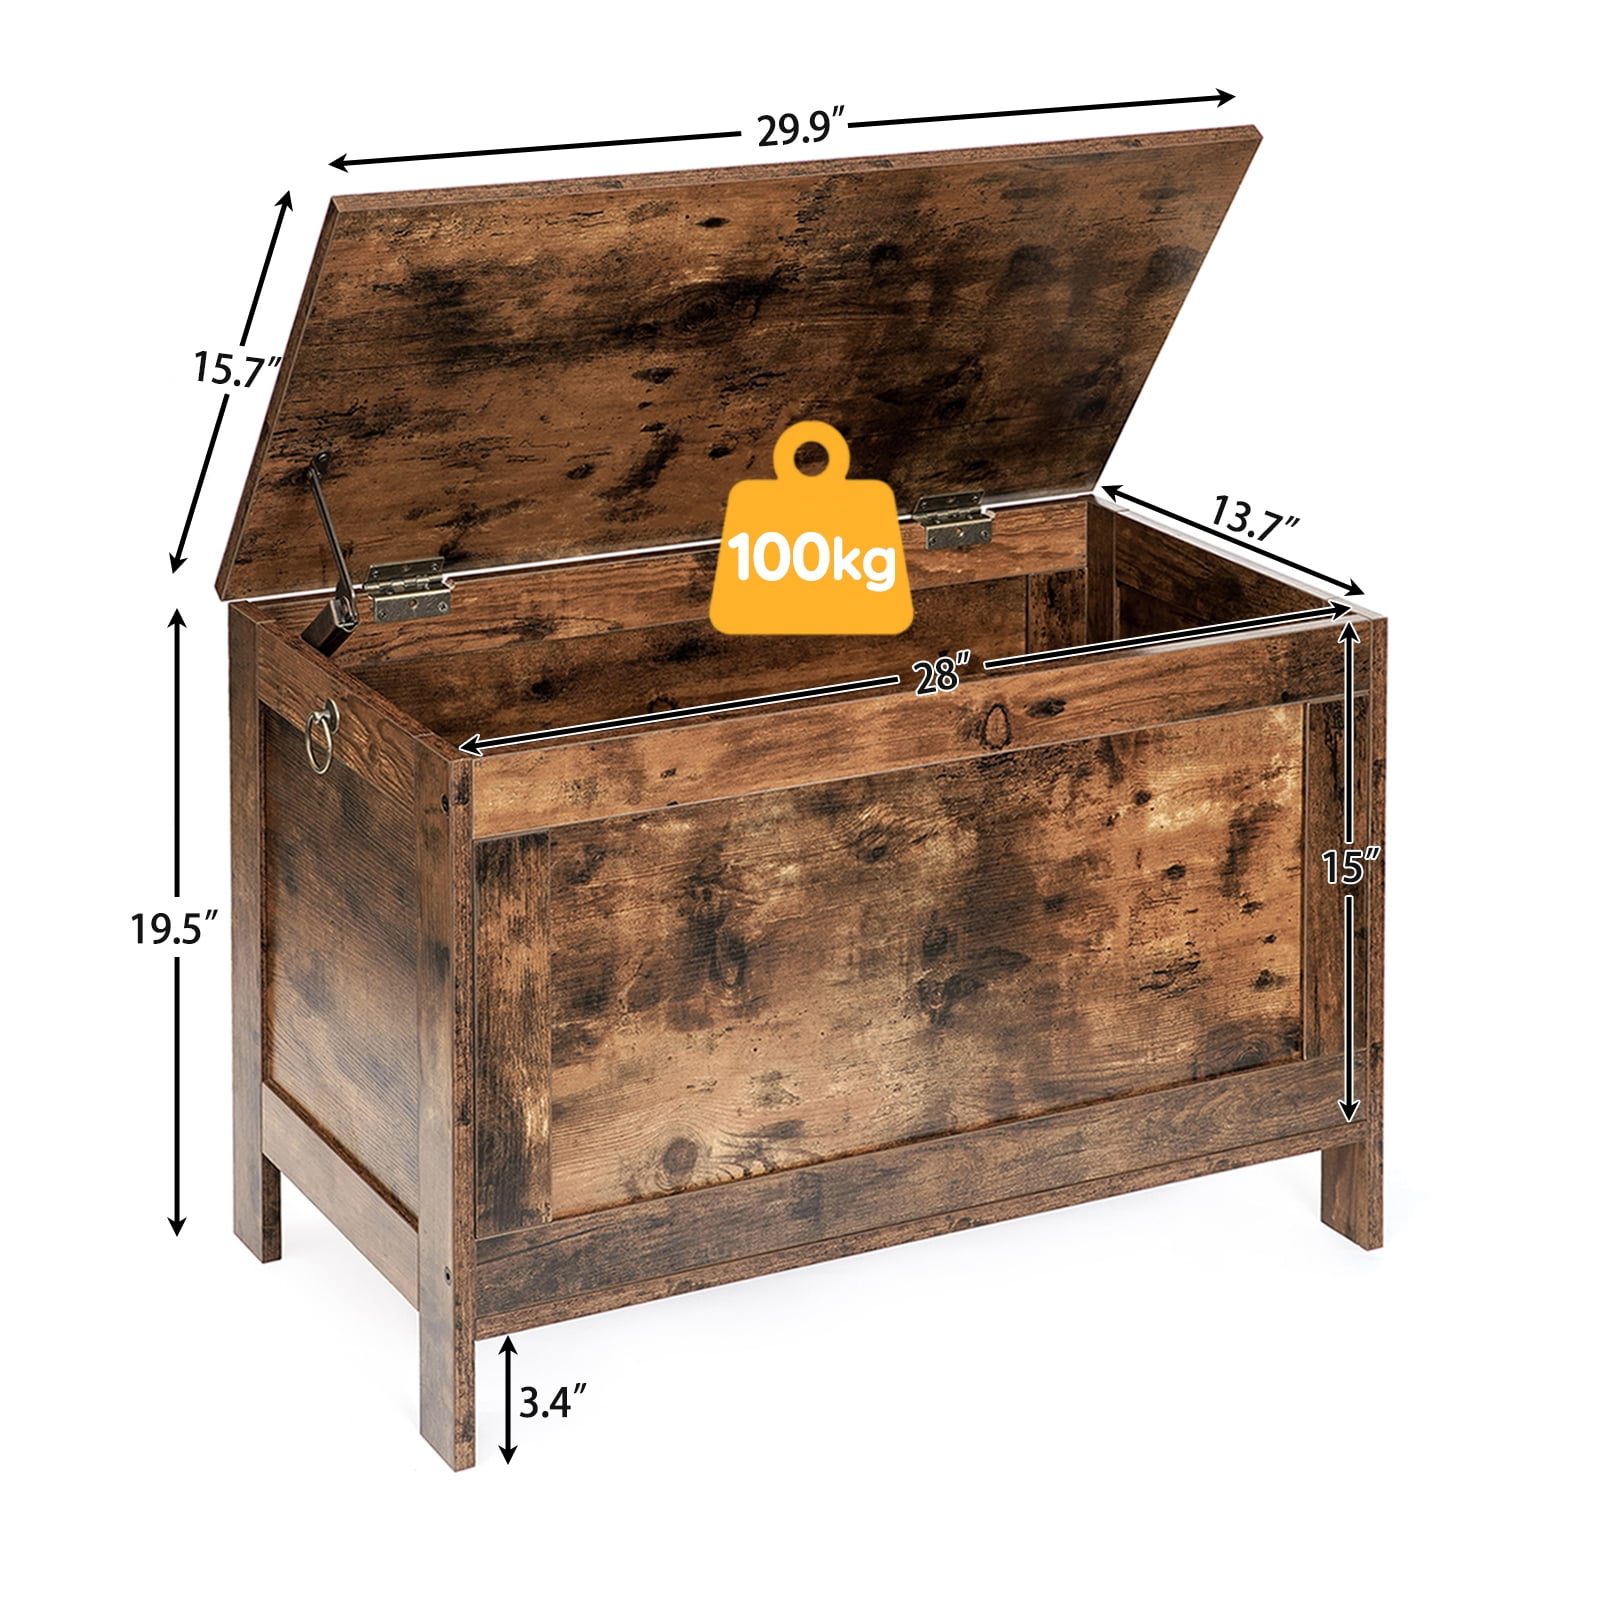 Retro Toy Box Organizer with Safety Hinge Easy Assembly Sturdy Entryway Storage Bench Wood Look Accent Furniture HOOBRO Storage Chest Greige BG75CW01 